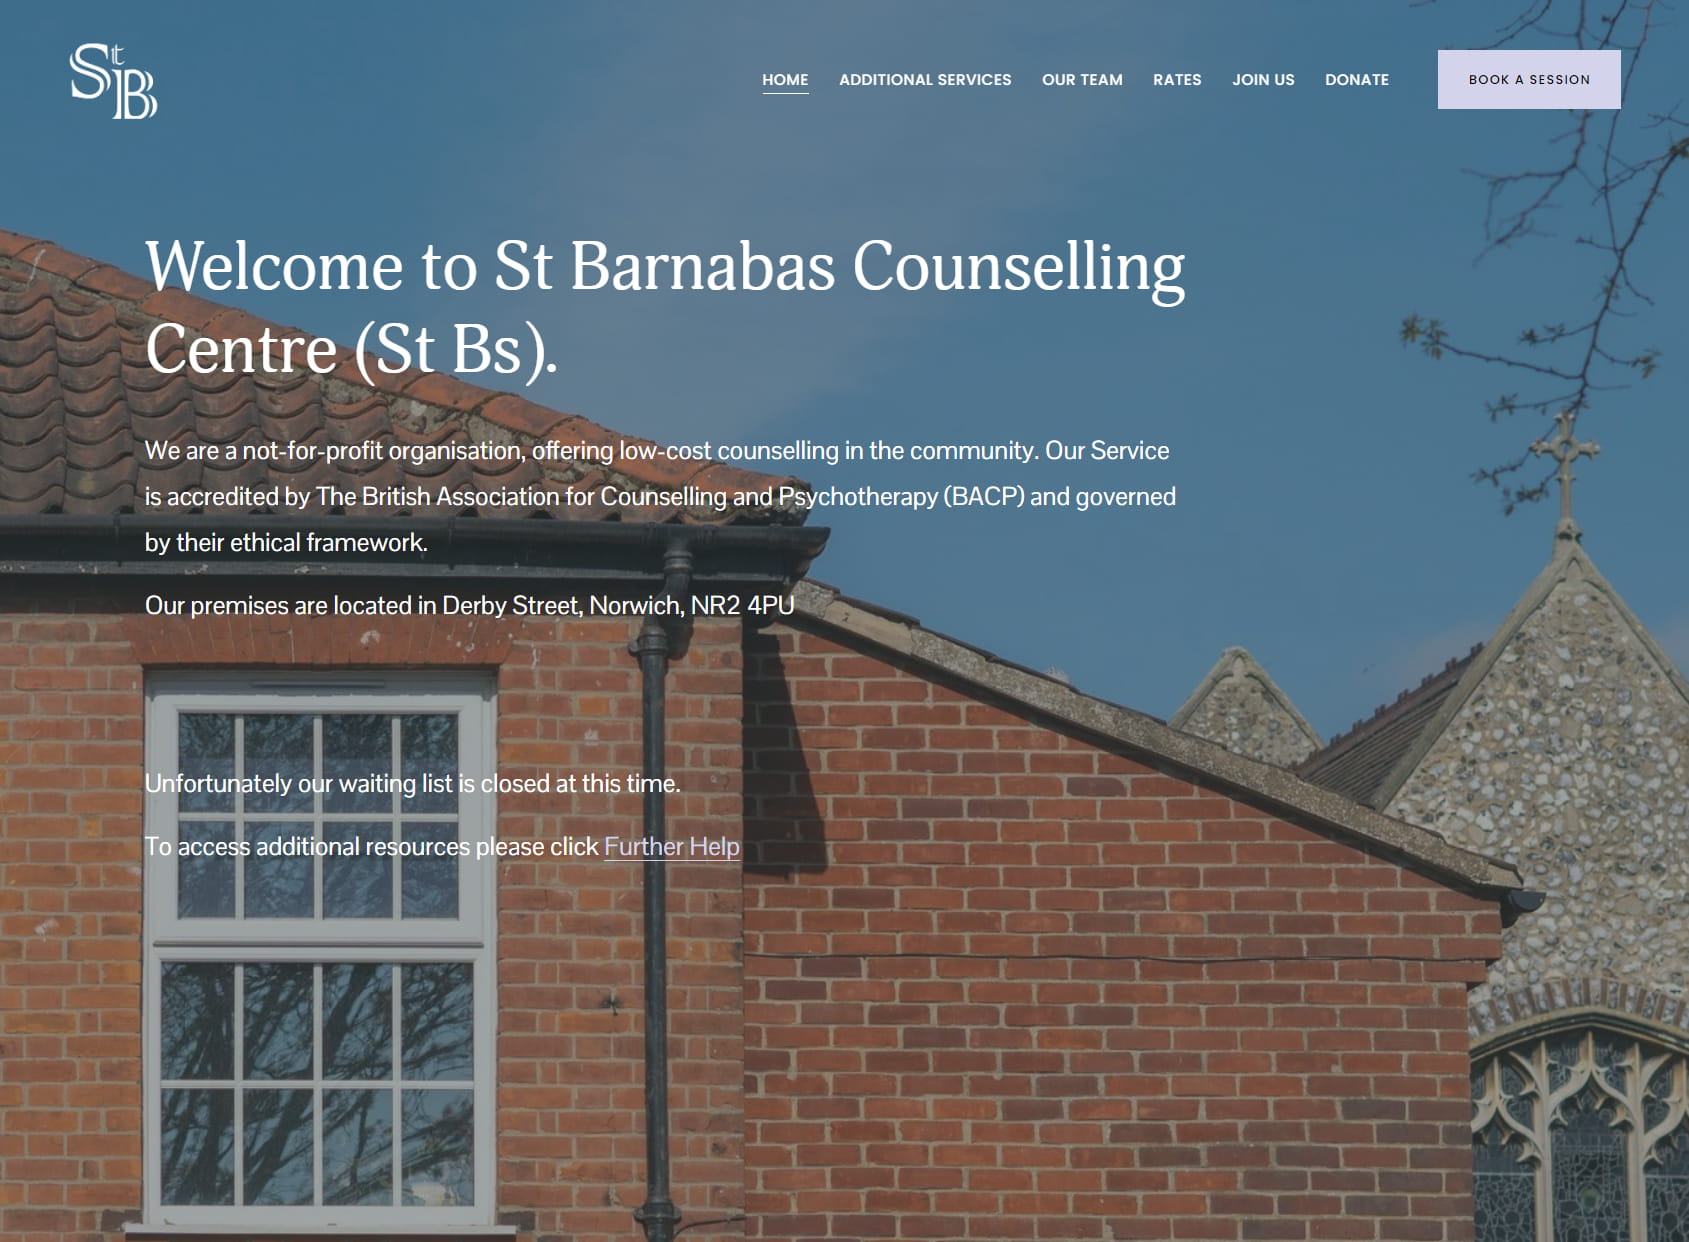 St Barnabas Counselling Centre